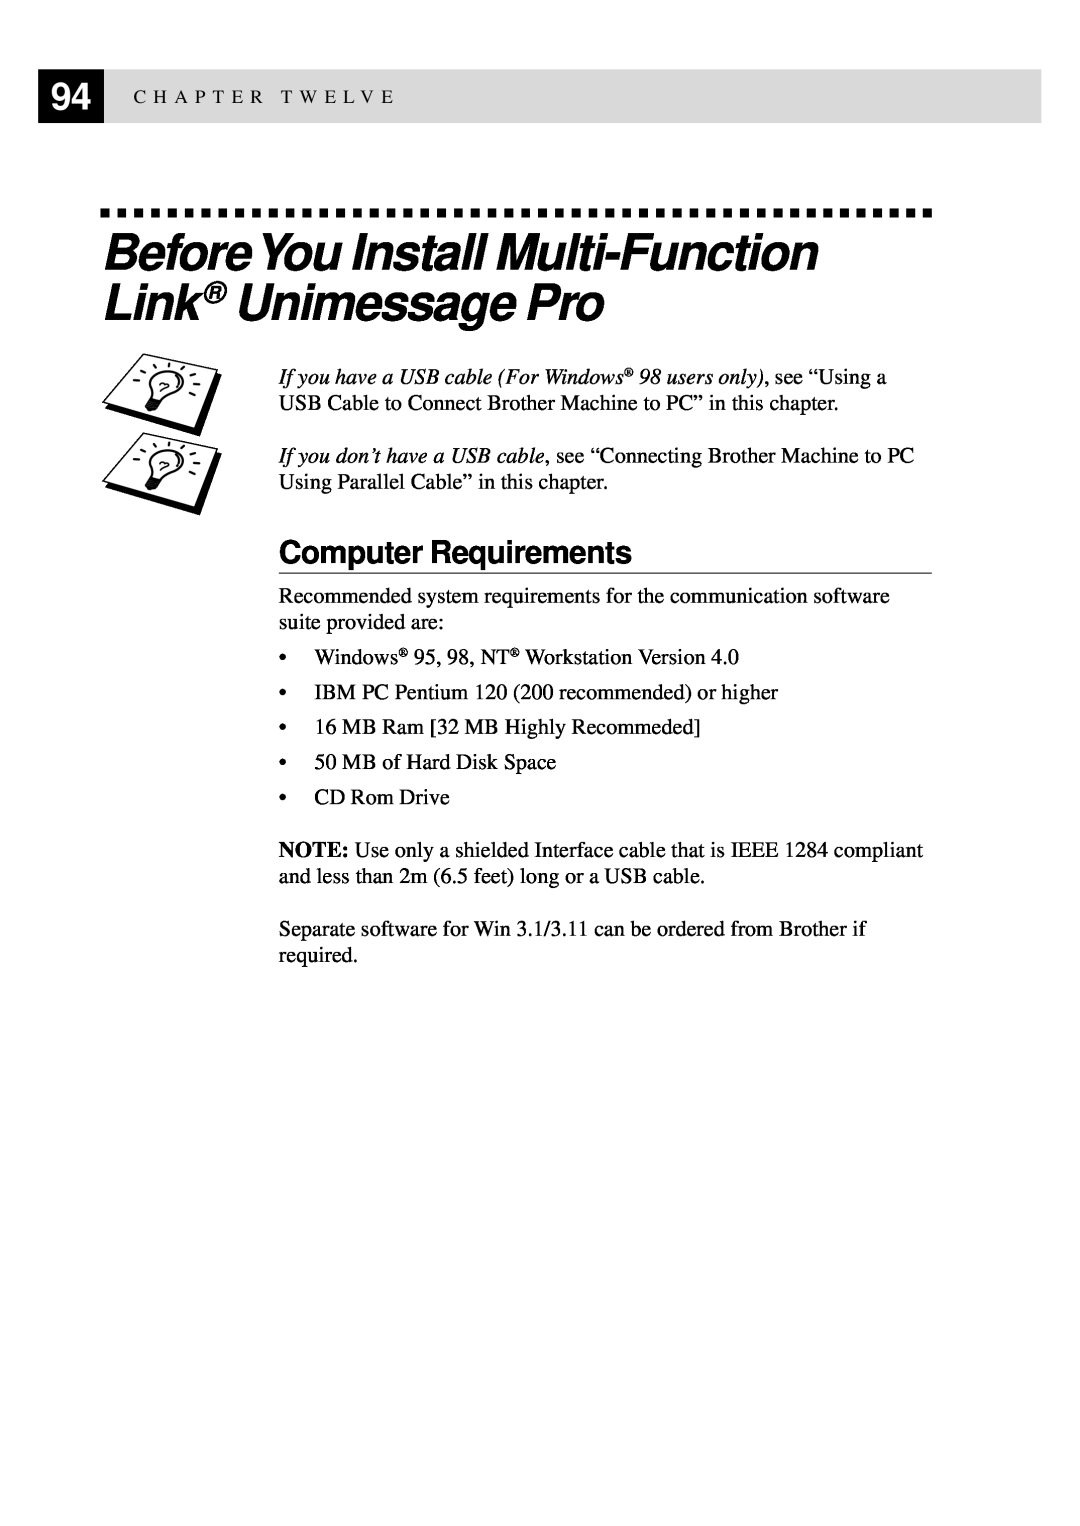 Brother FAX-8350P, MFC-9650 owner manual BeforeYou Install Multi-Function Link Unimessage Pro, Computer Requirements 